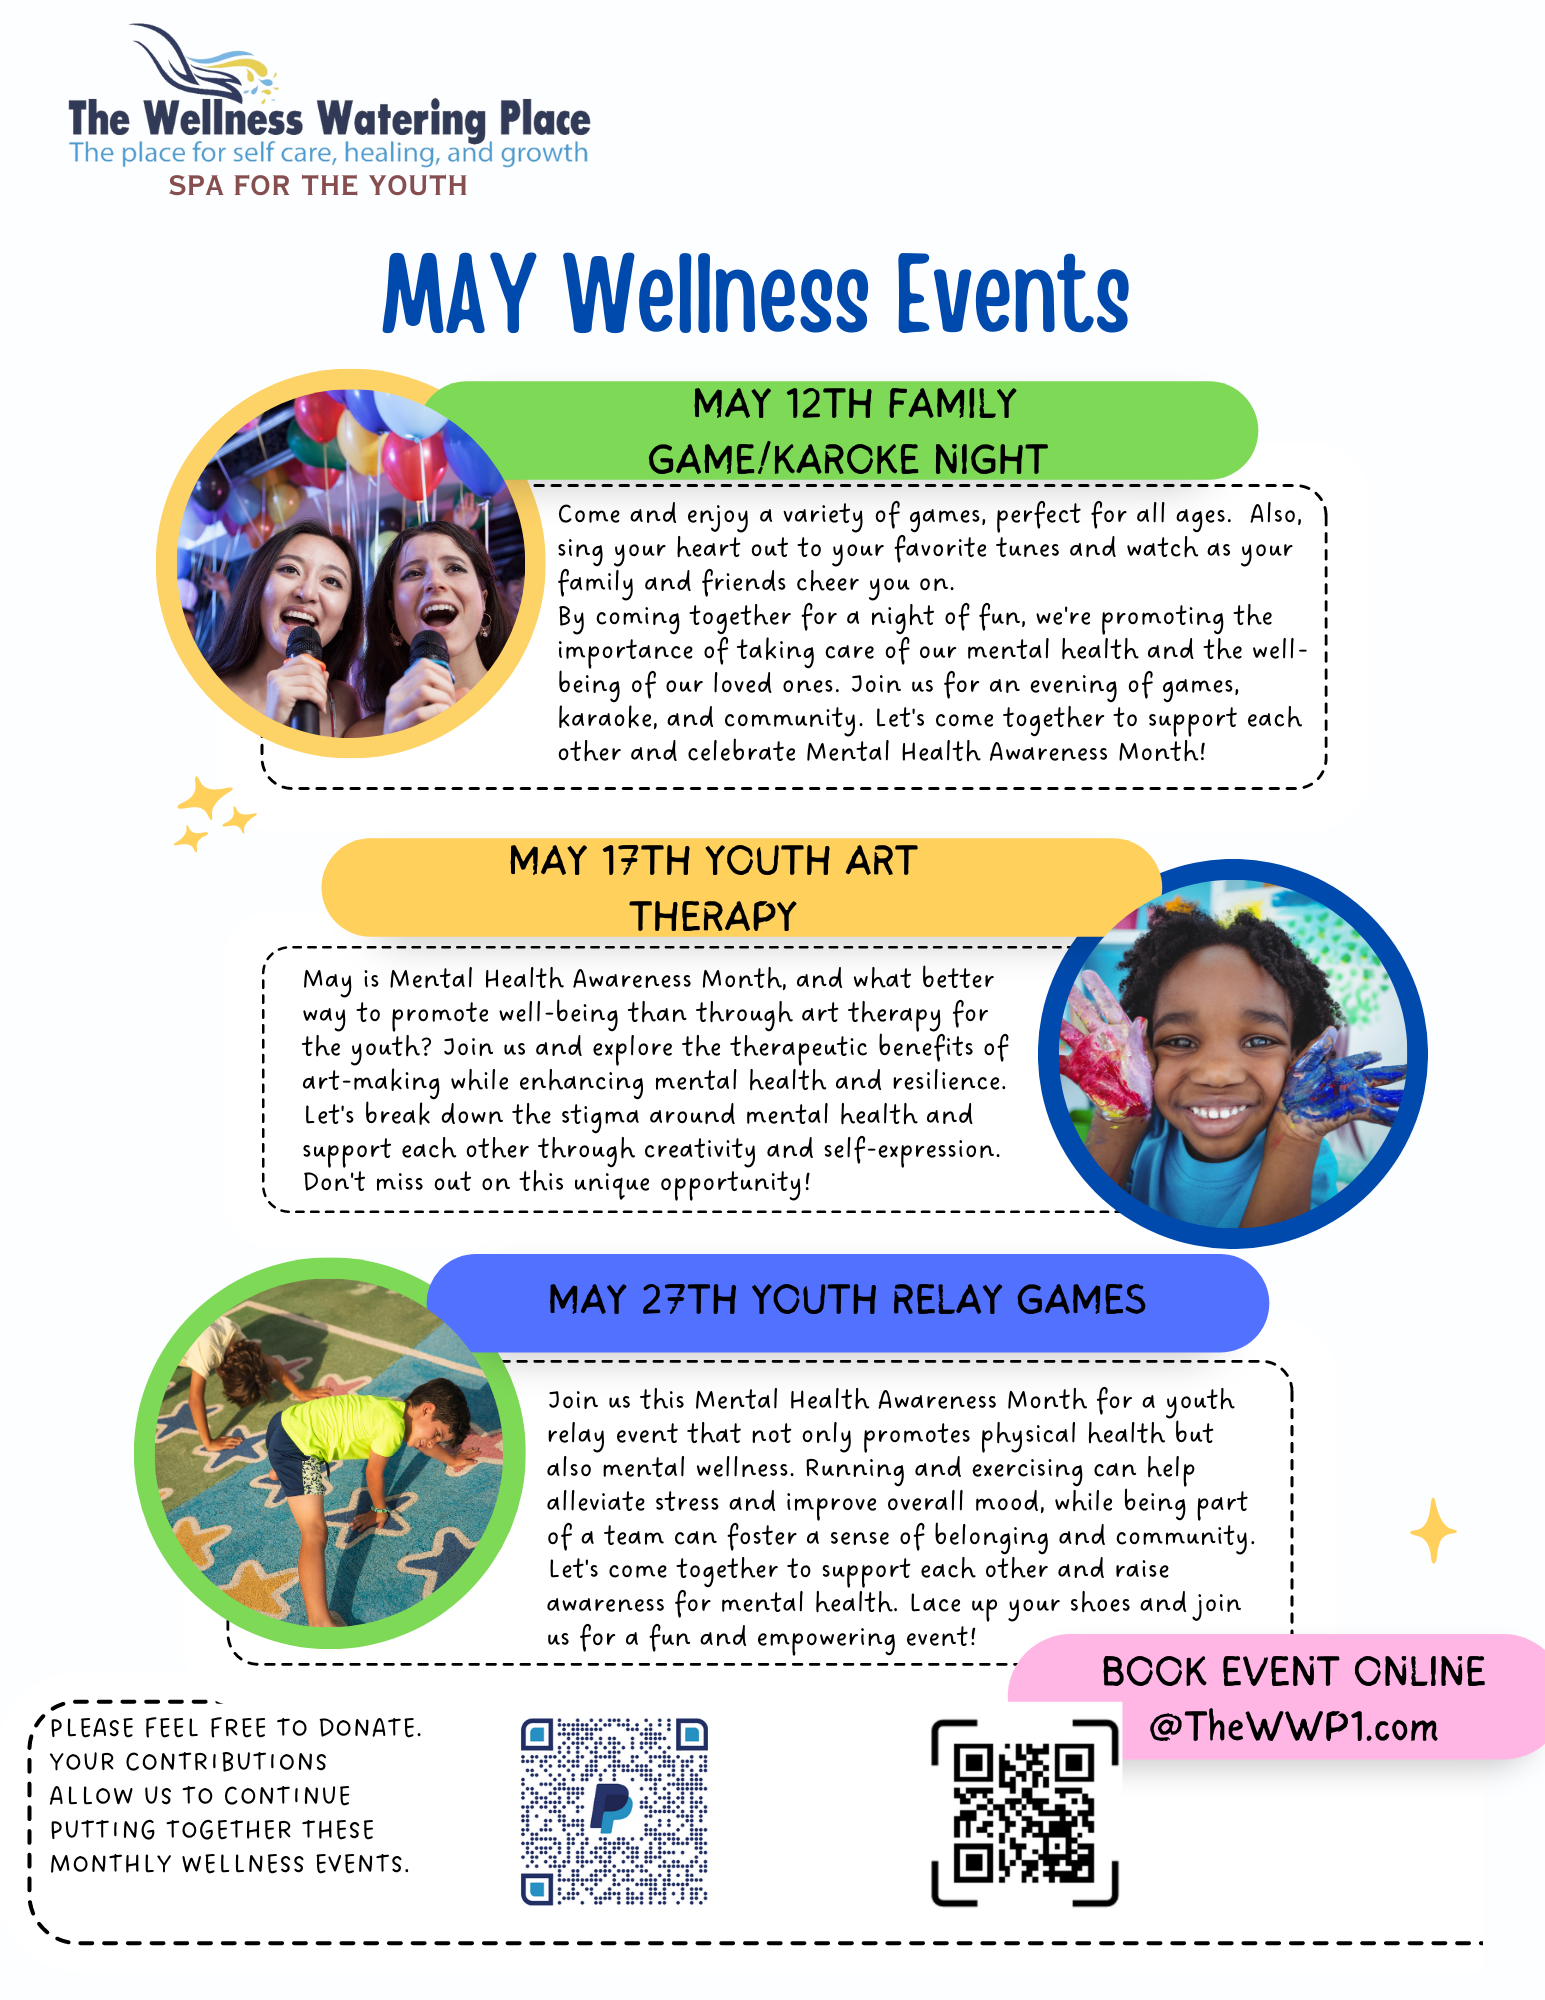 May Wellness Events